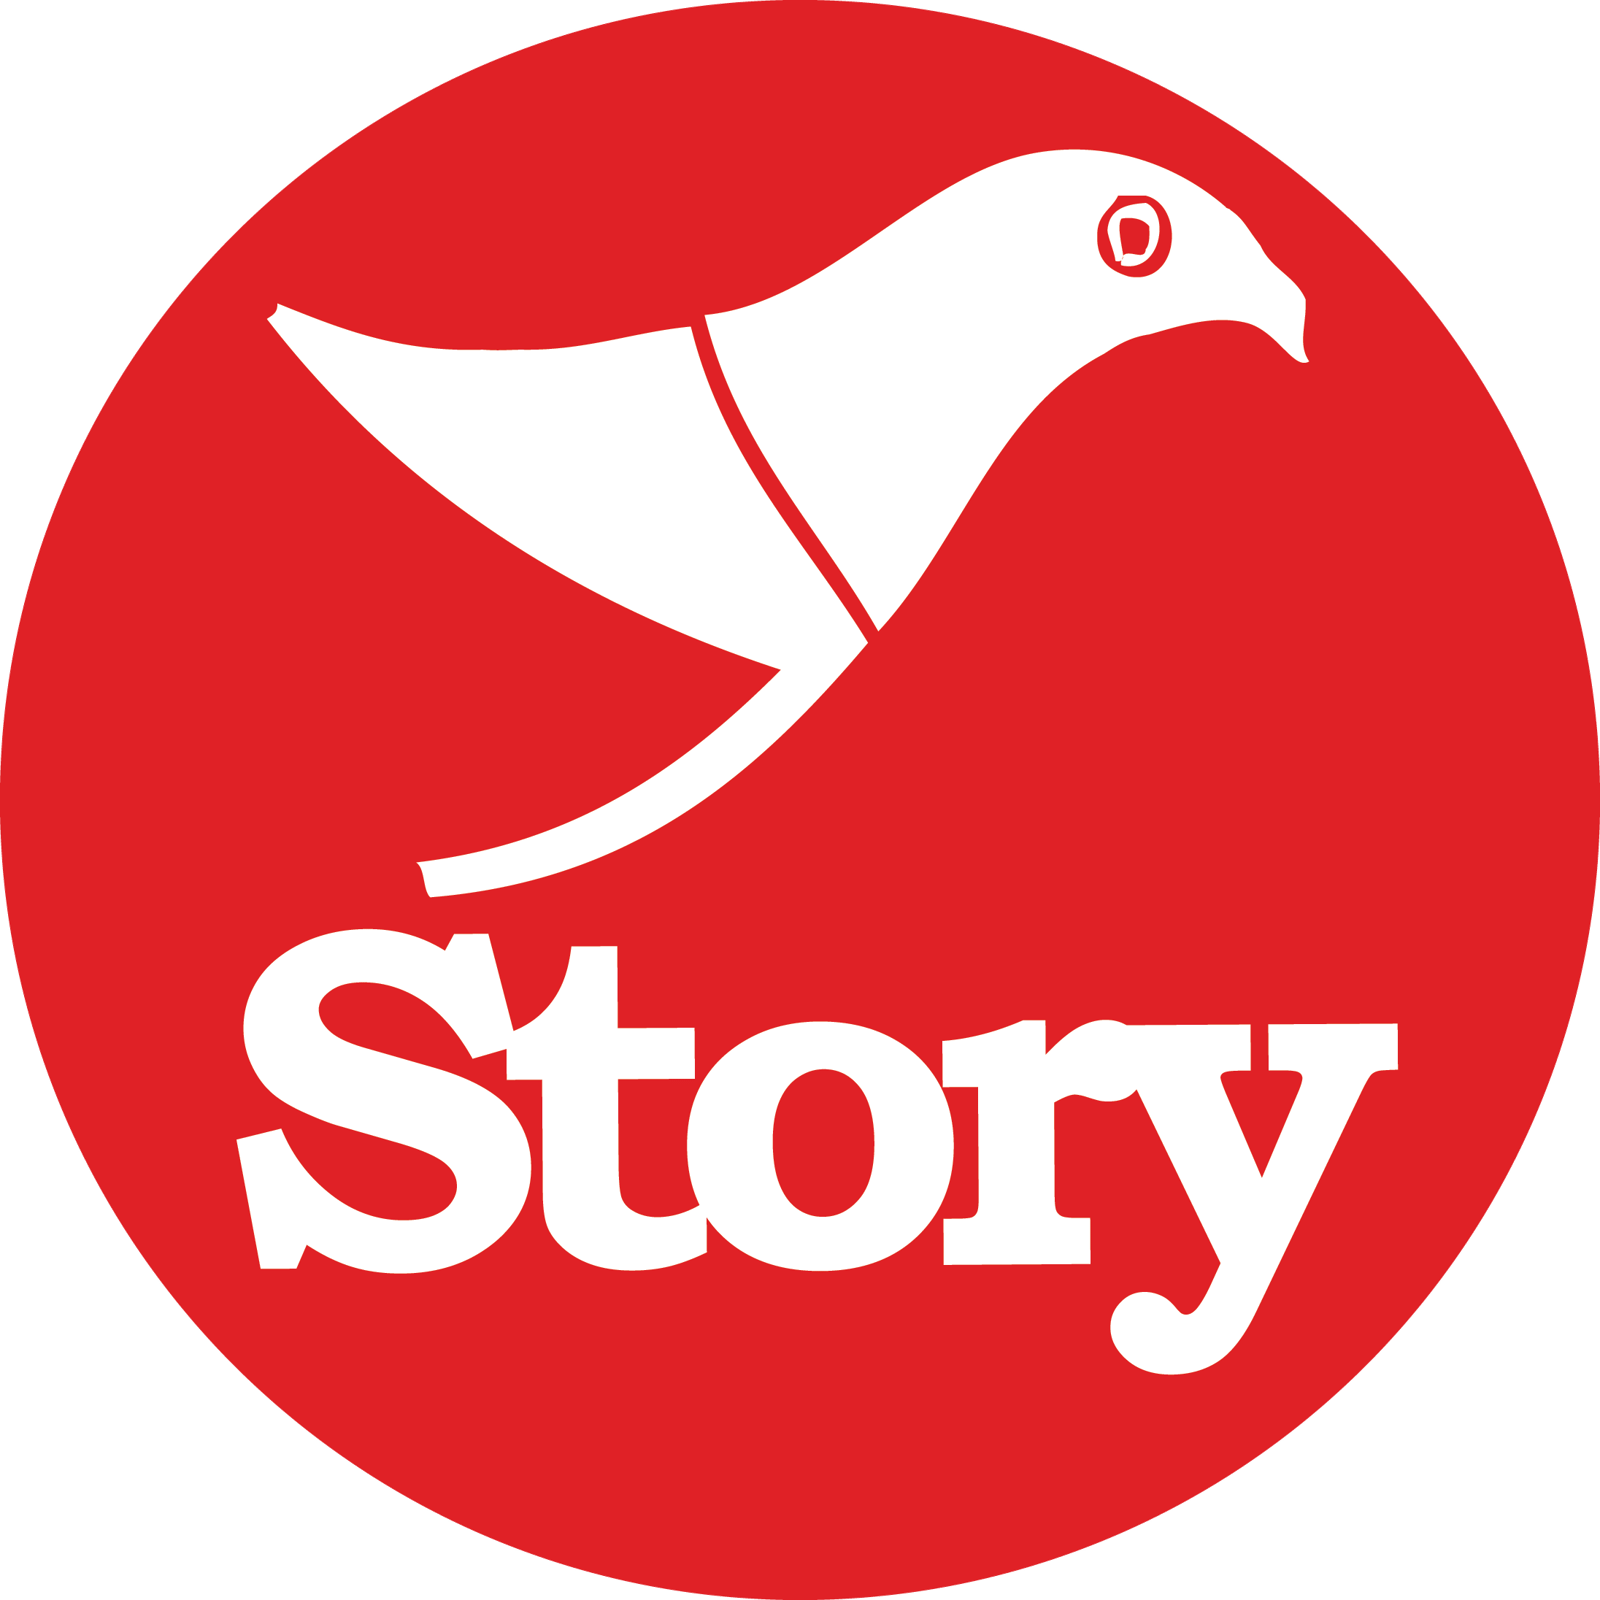 Story Store